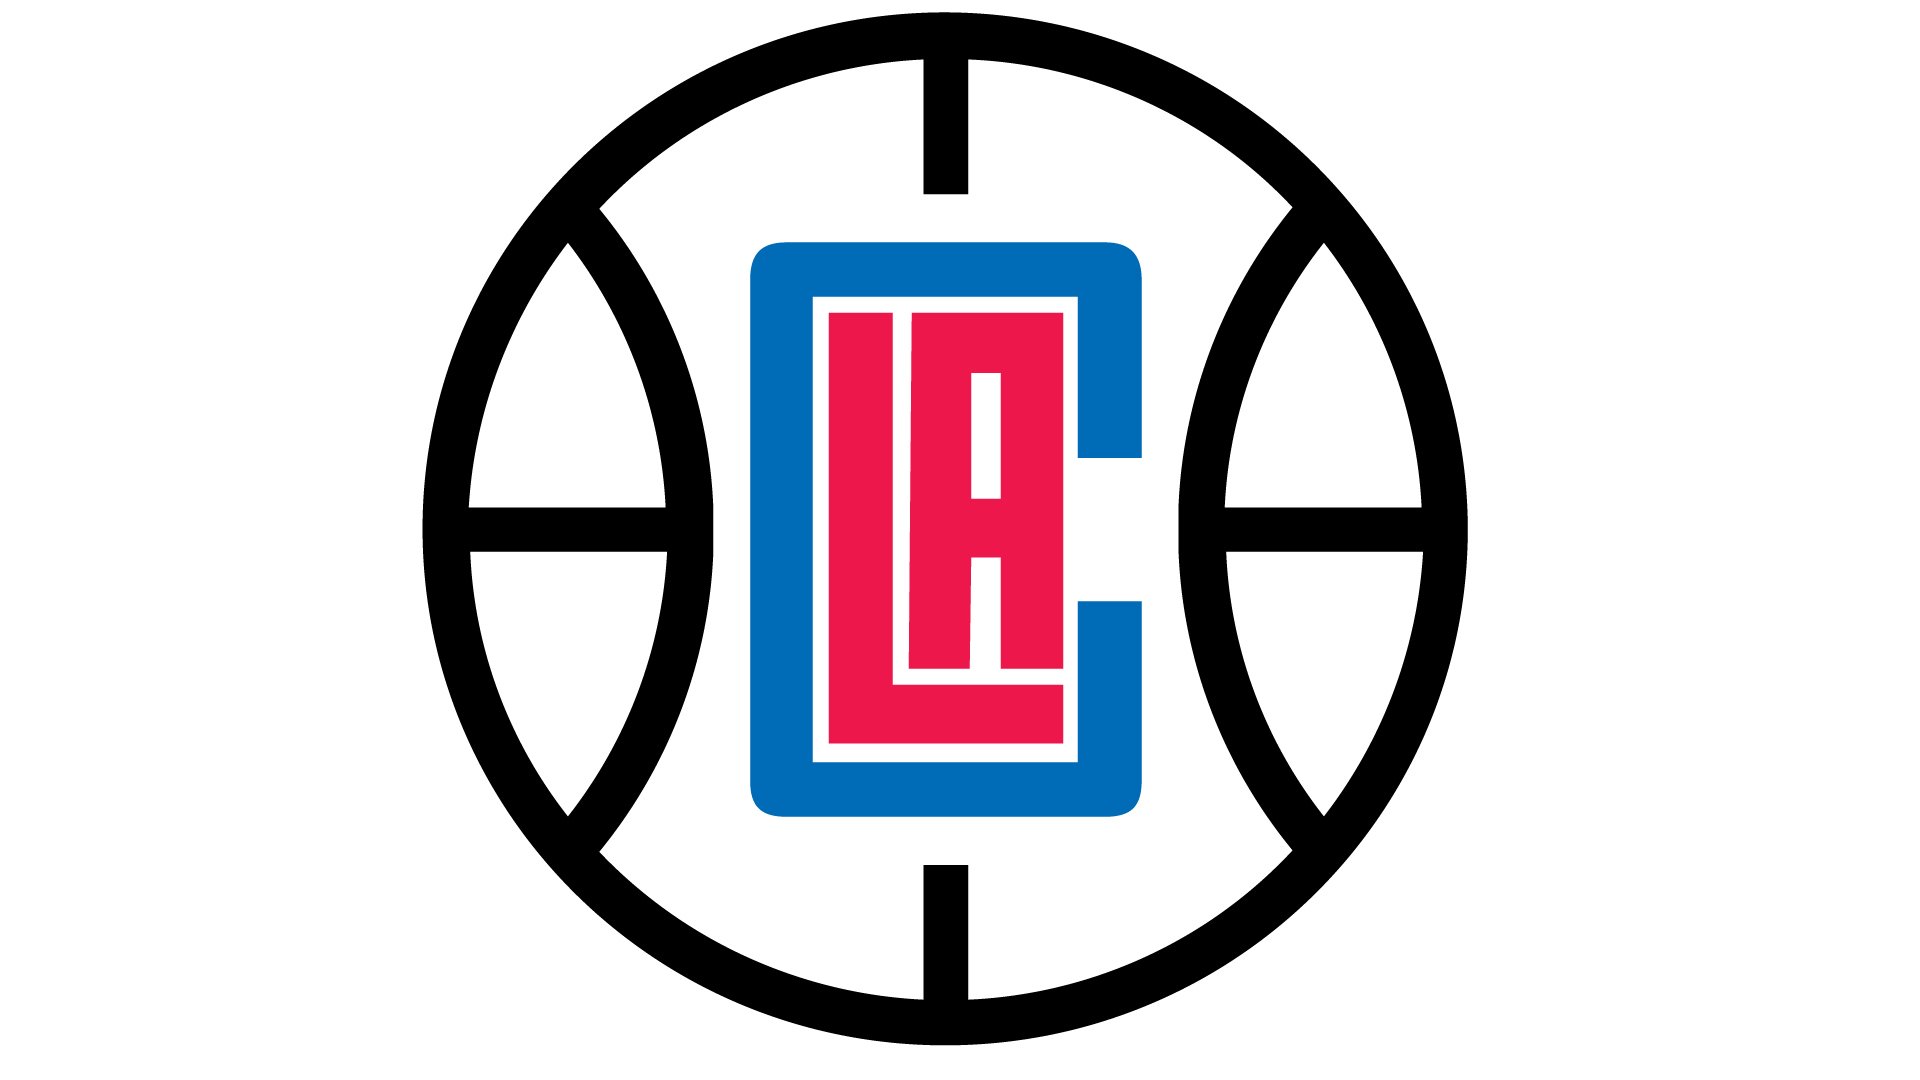 Los Angeles Clippers Logo and symbol, meaning, history, PNG, brand